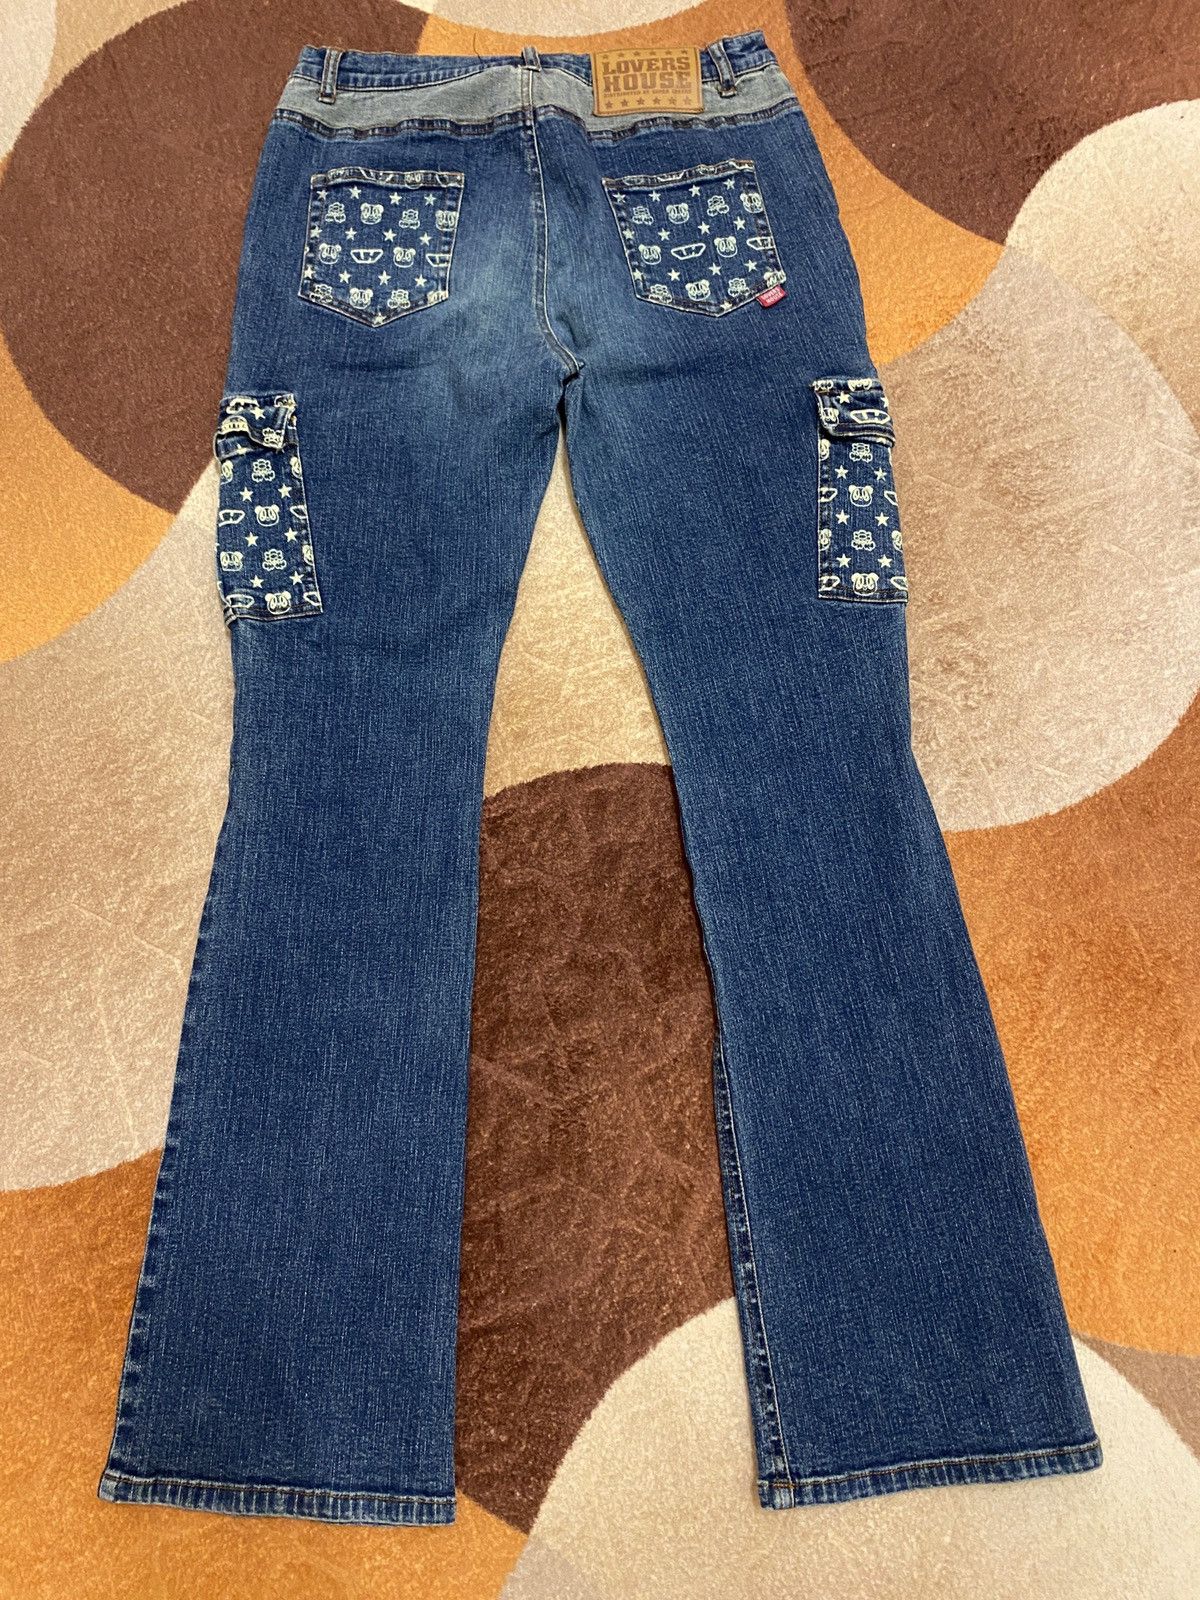 Japanese Brand - Super Lovers / Lovers House Bootcut Jeans - 4